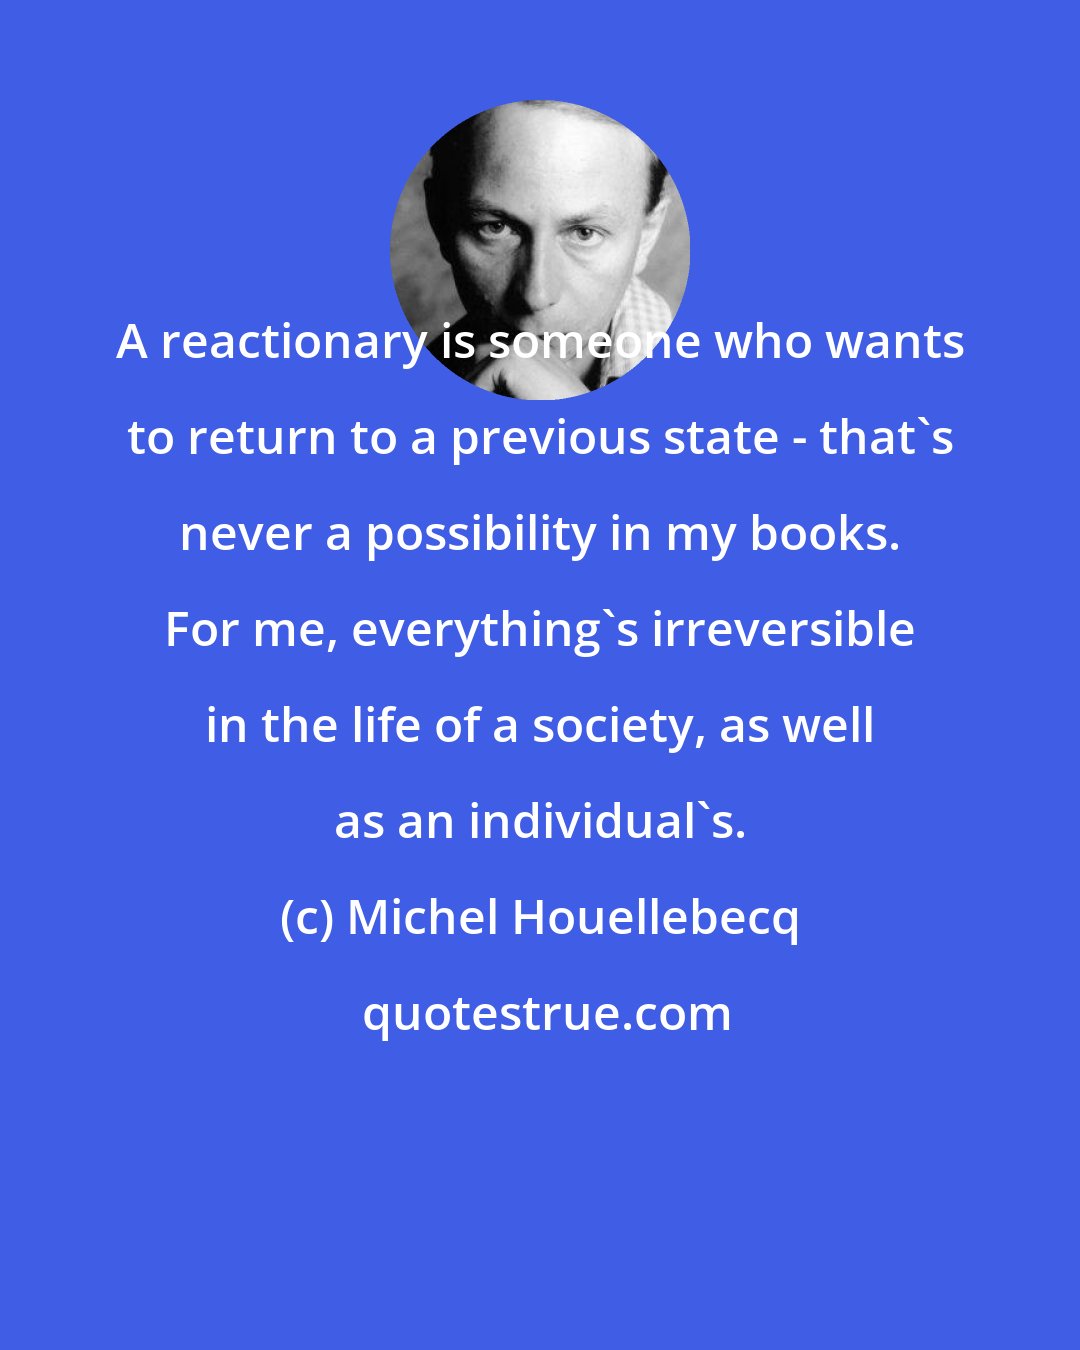 Michel Houellebecq: A reactionary is someone who wants to return to a previous state - that's never a possibility in my books. For me, everything's irreversible in the life of a society, as well as an individual's.